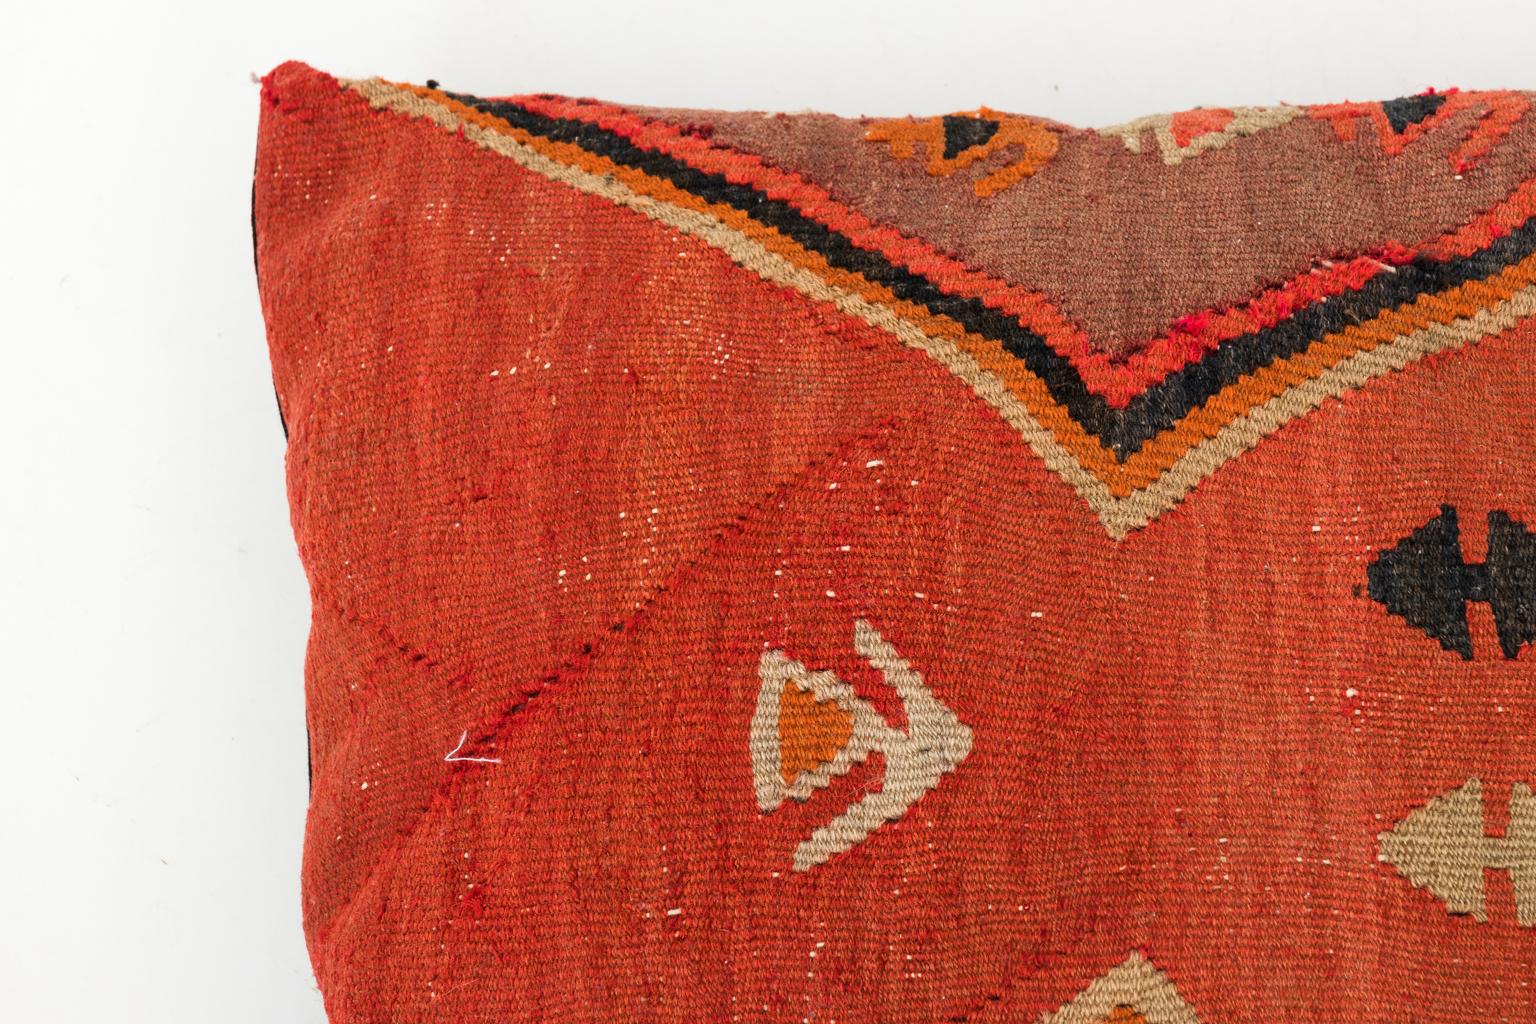 Set of four Turkish Kilim fabric pillows with Geometric detail, circa 20th century. Please note that the fabric has minor fading and repairs due to wear consistent with age.